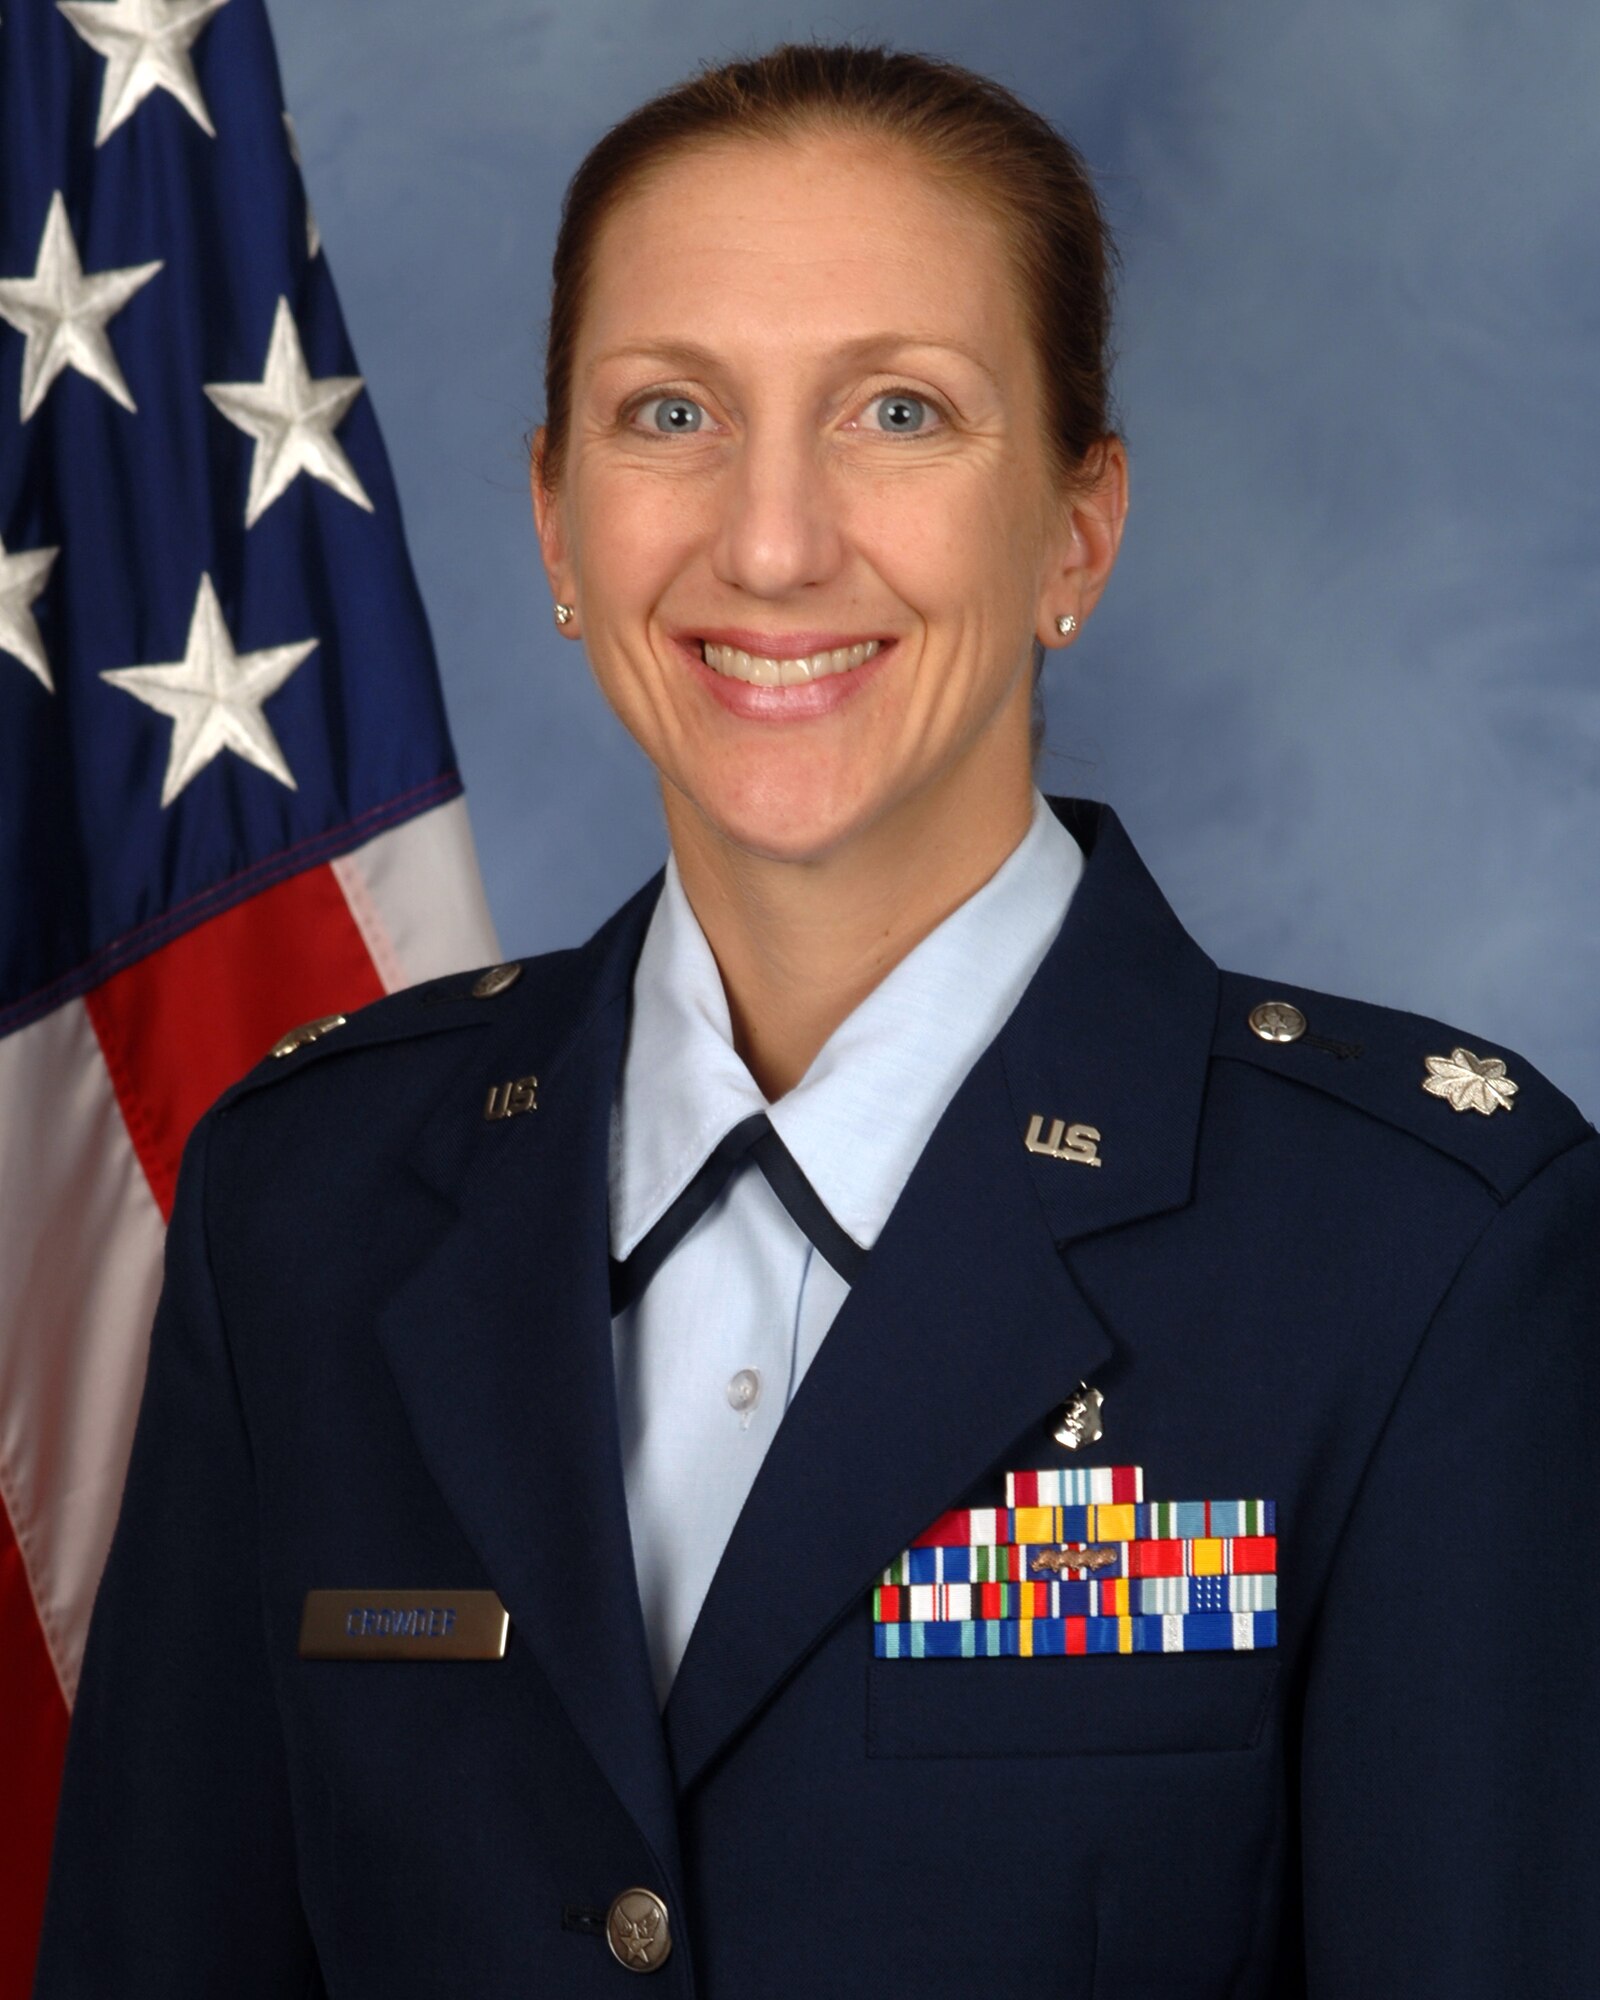 Lt. Col. Katie Crowder, 15th Medical Group’s Chief of Medical Staff, is the 2017 Association of Military Surgeons of Uniformed Services Physician of the Year.